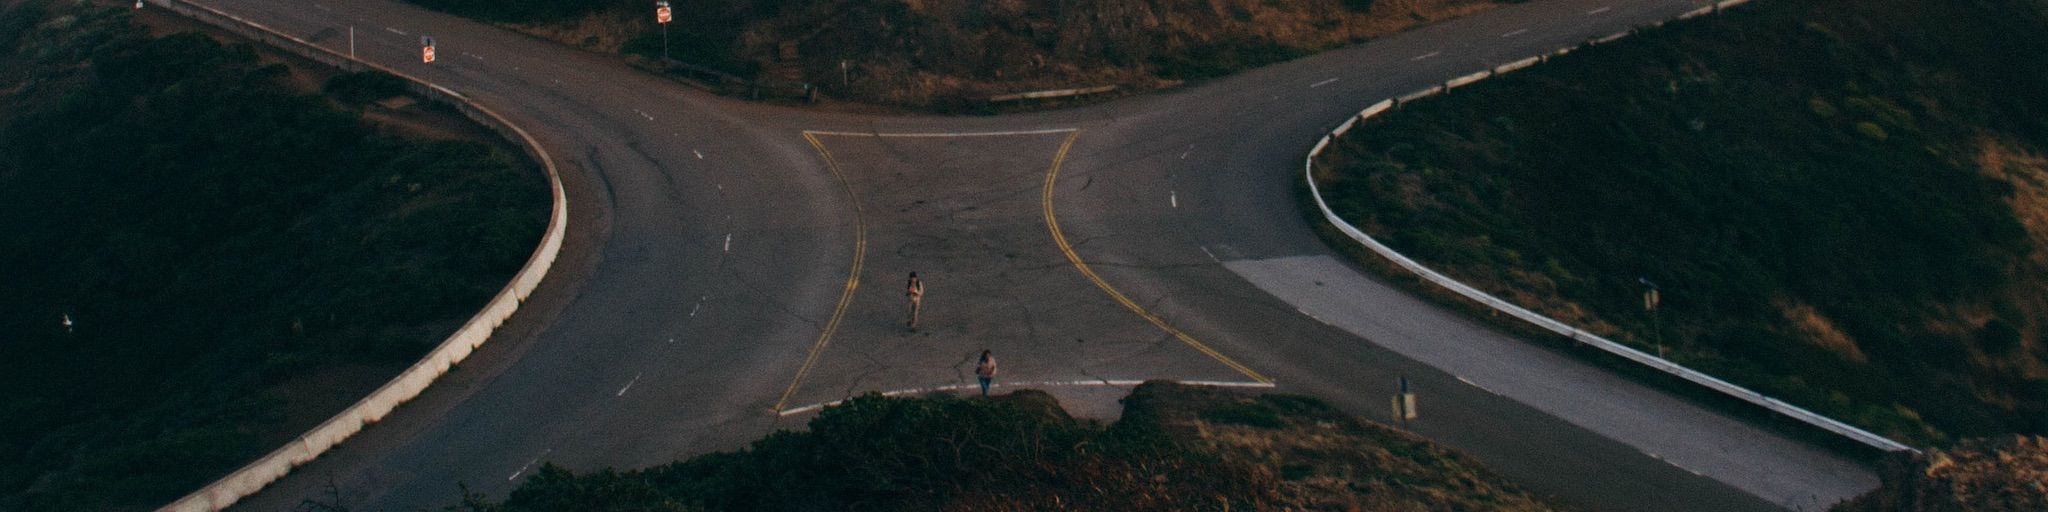 Two people standing on a merging hill road